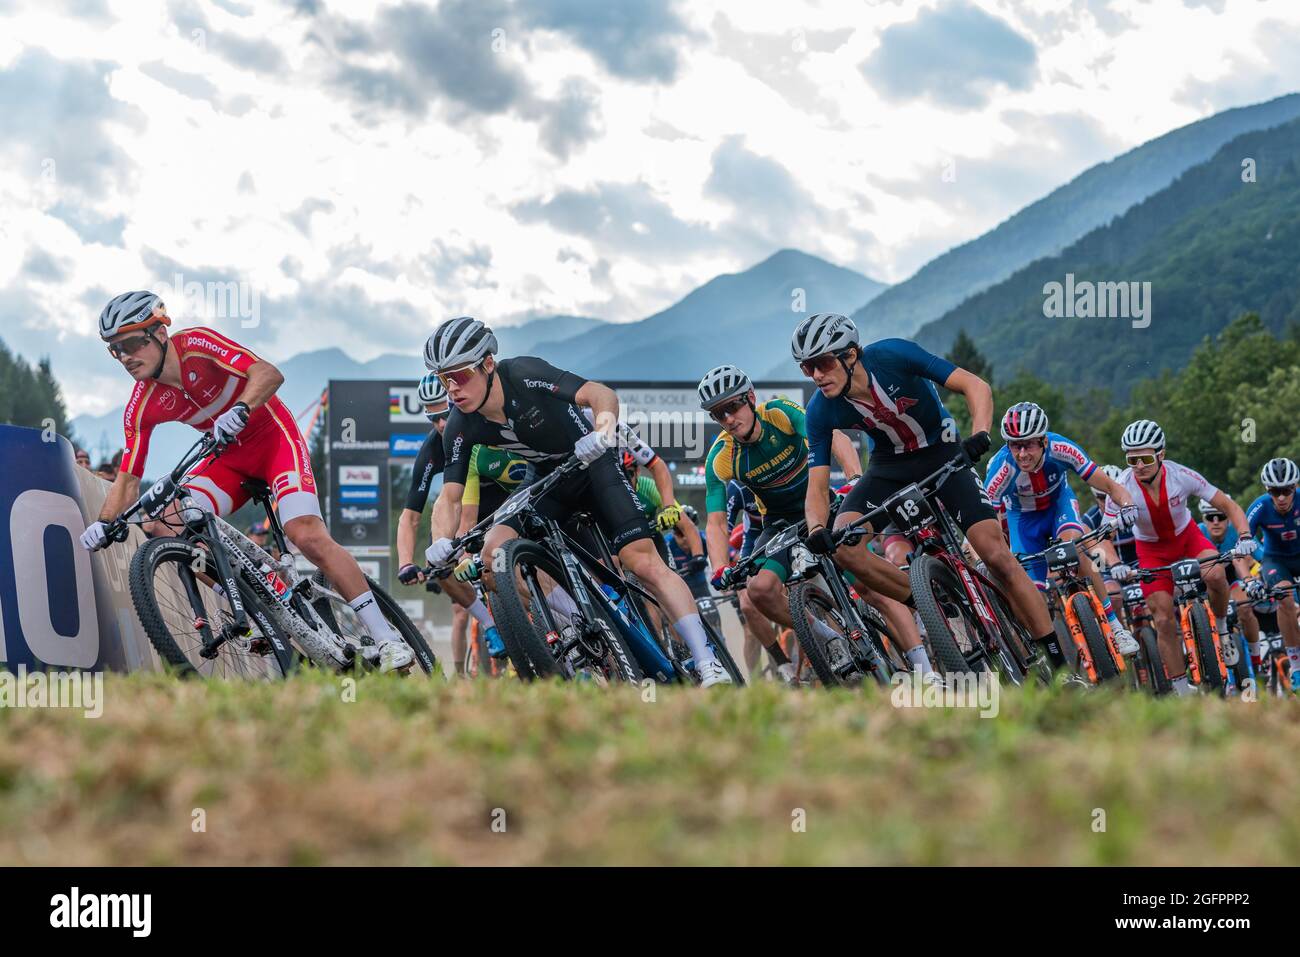 Riders during the Cross Country Short Track XCC at the 2021 MTB World Championships, Mountain Bike cycling event on August 26, 2021 in Val Di Sole, Italy - Photo Olly Bowman / DPPI Stock Photo